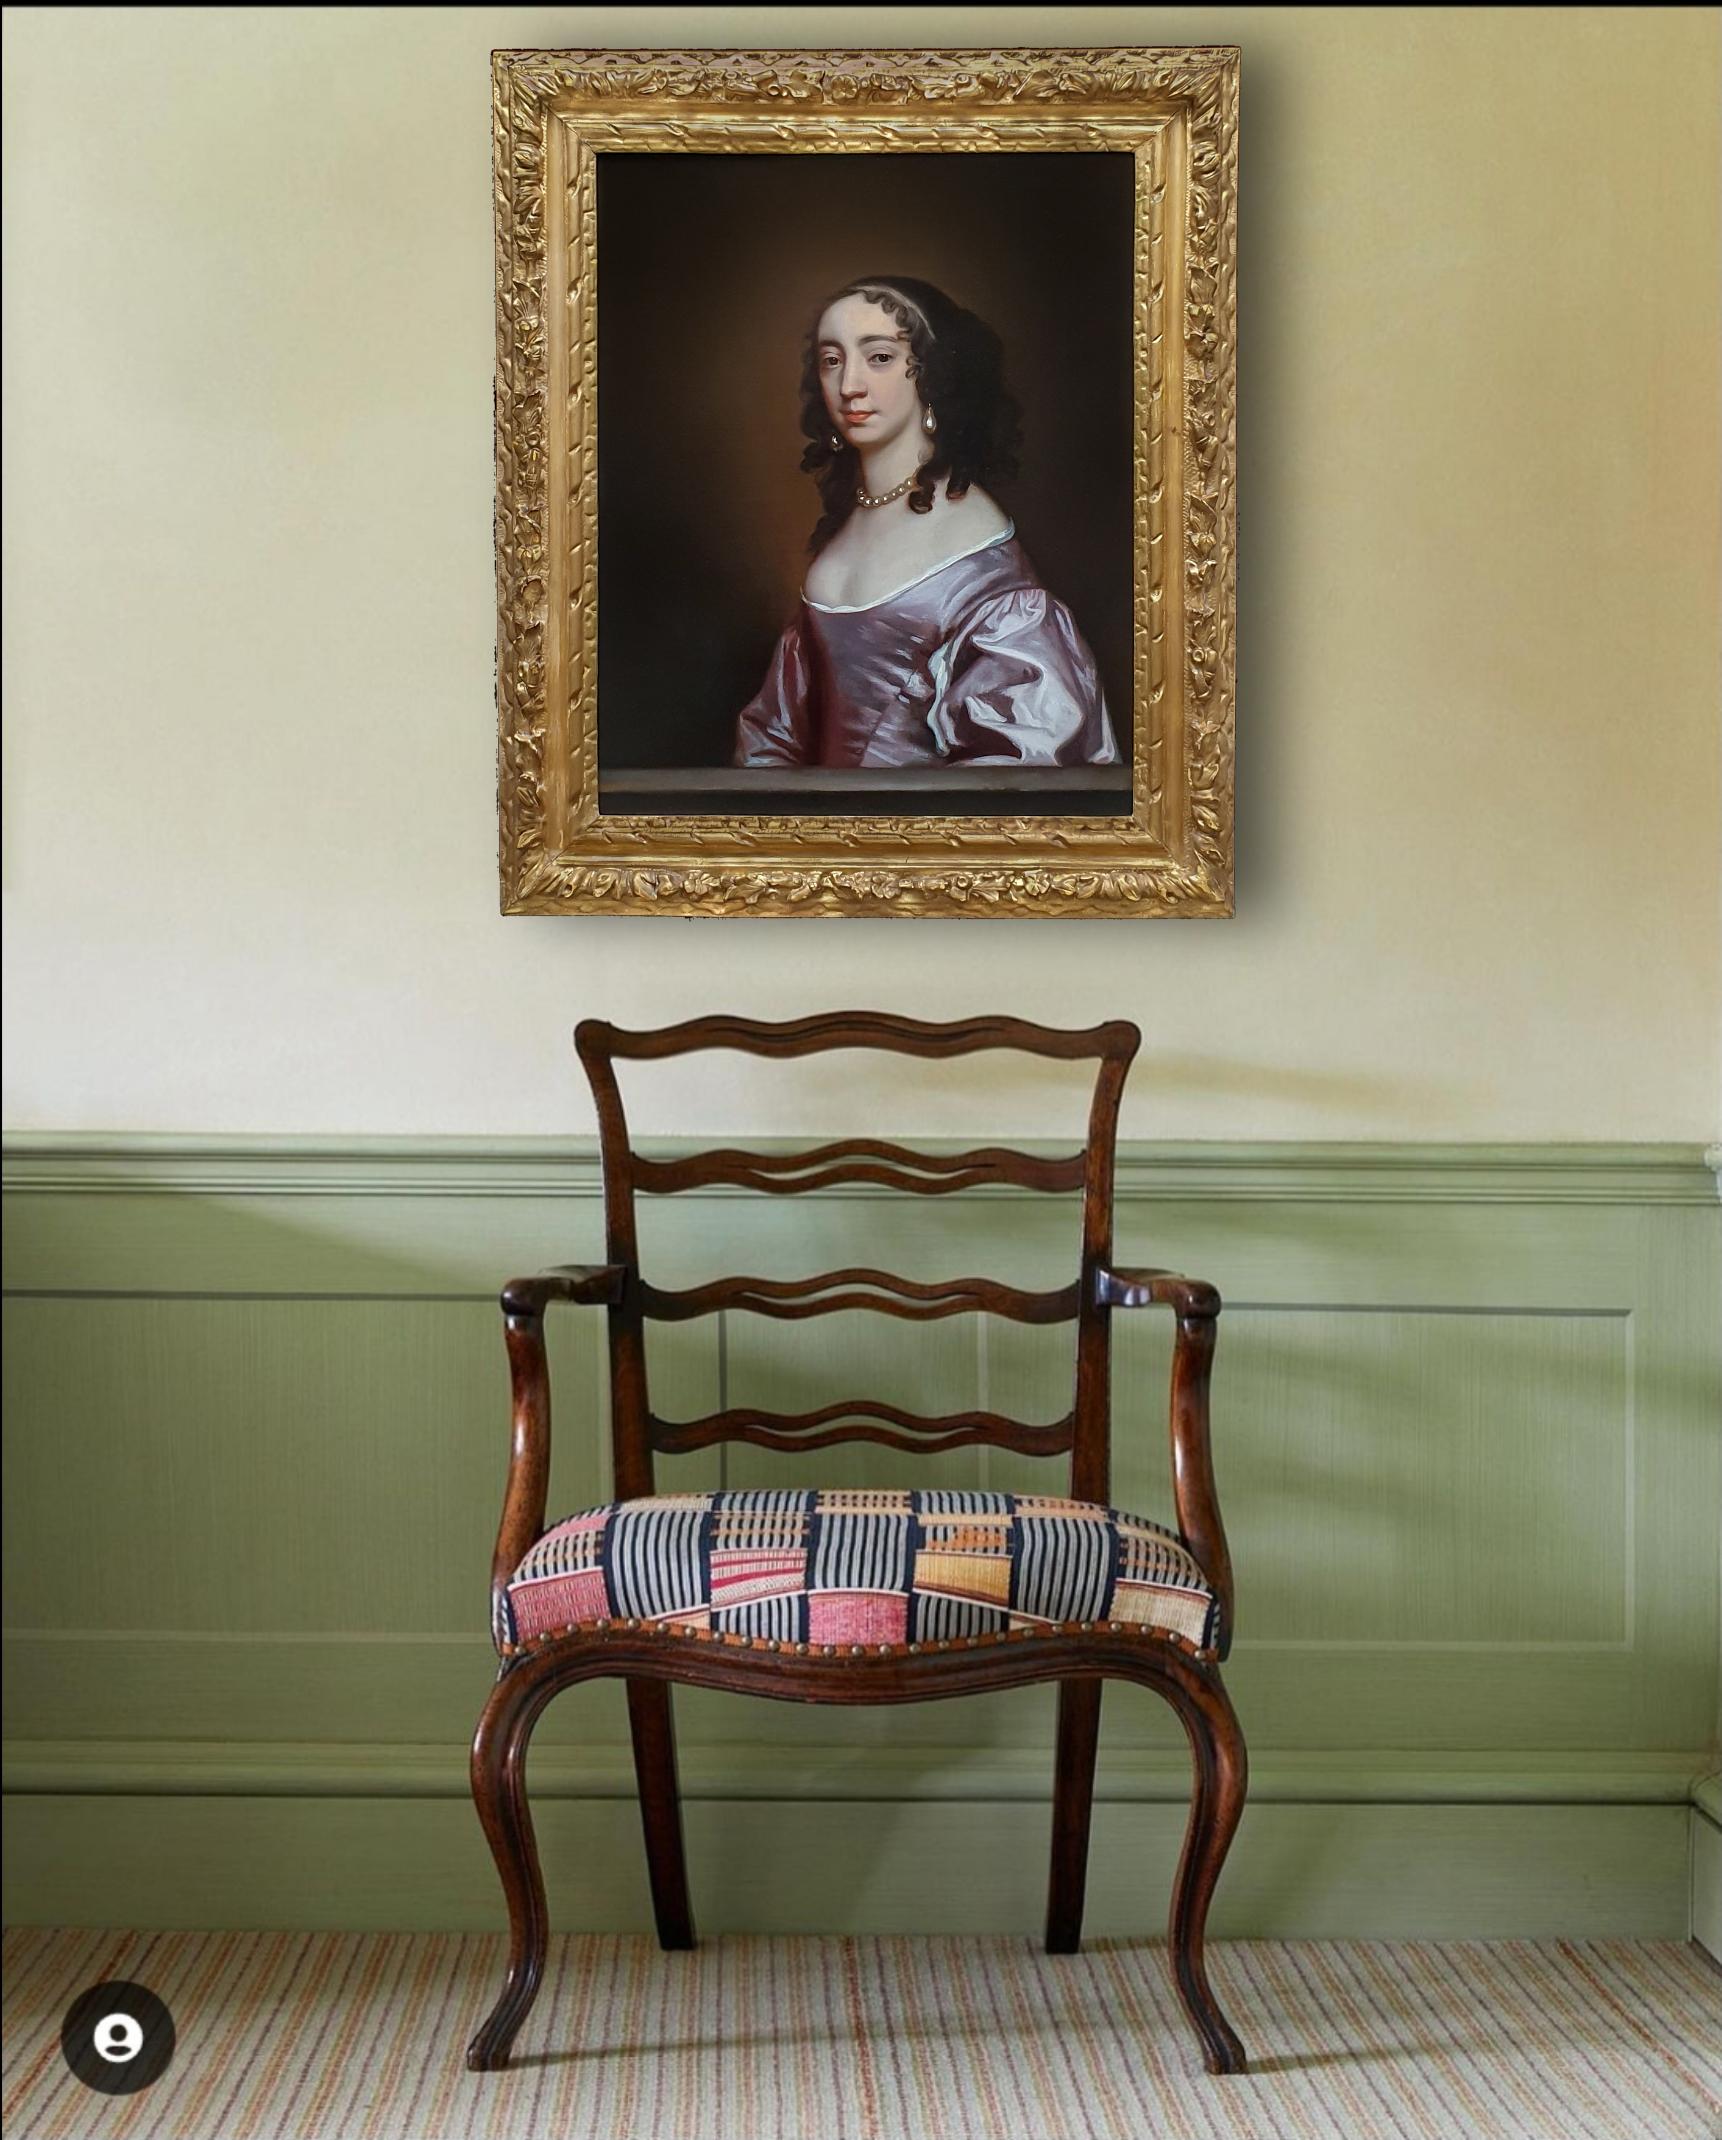 Titan Fine Art are pleased to present this exquisite work which recent research has uncovered its fascinating provenence.  This work formed part of the collection of family pictures and heirlooms of Barons de Saumarez family at their magnificent